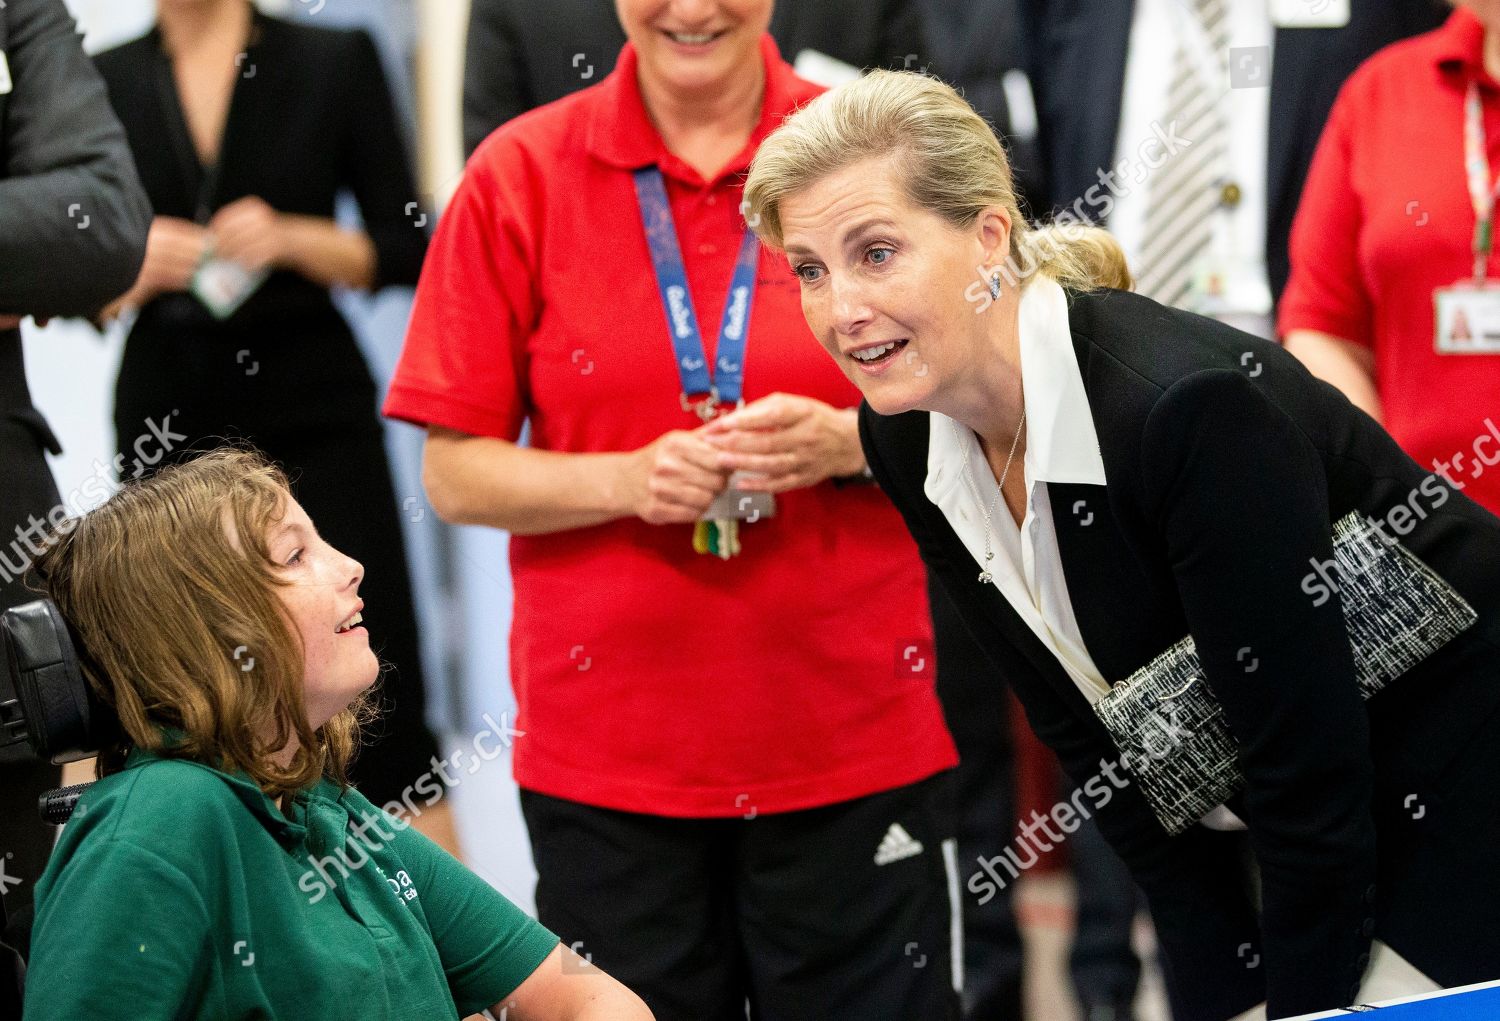 sophie-countess-of-wessex-visits-the-treloar-trust-college-holybourne-uk-shutterstock-editorial-10279529q.jpg